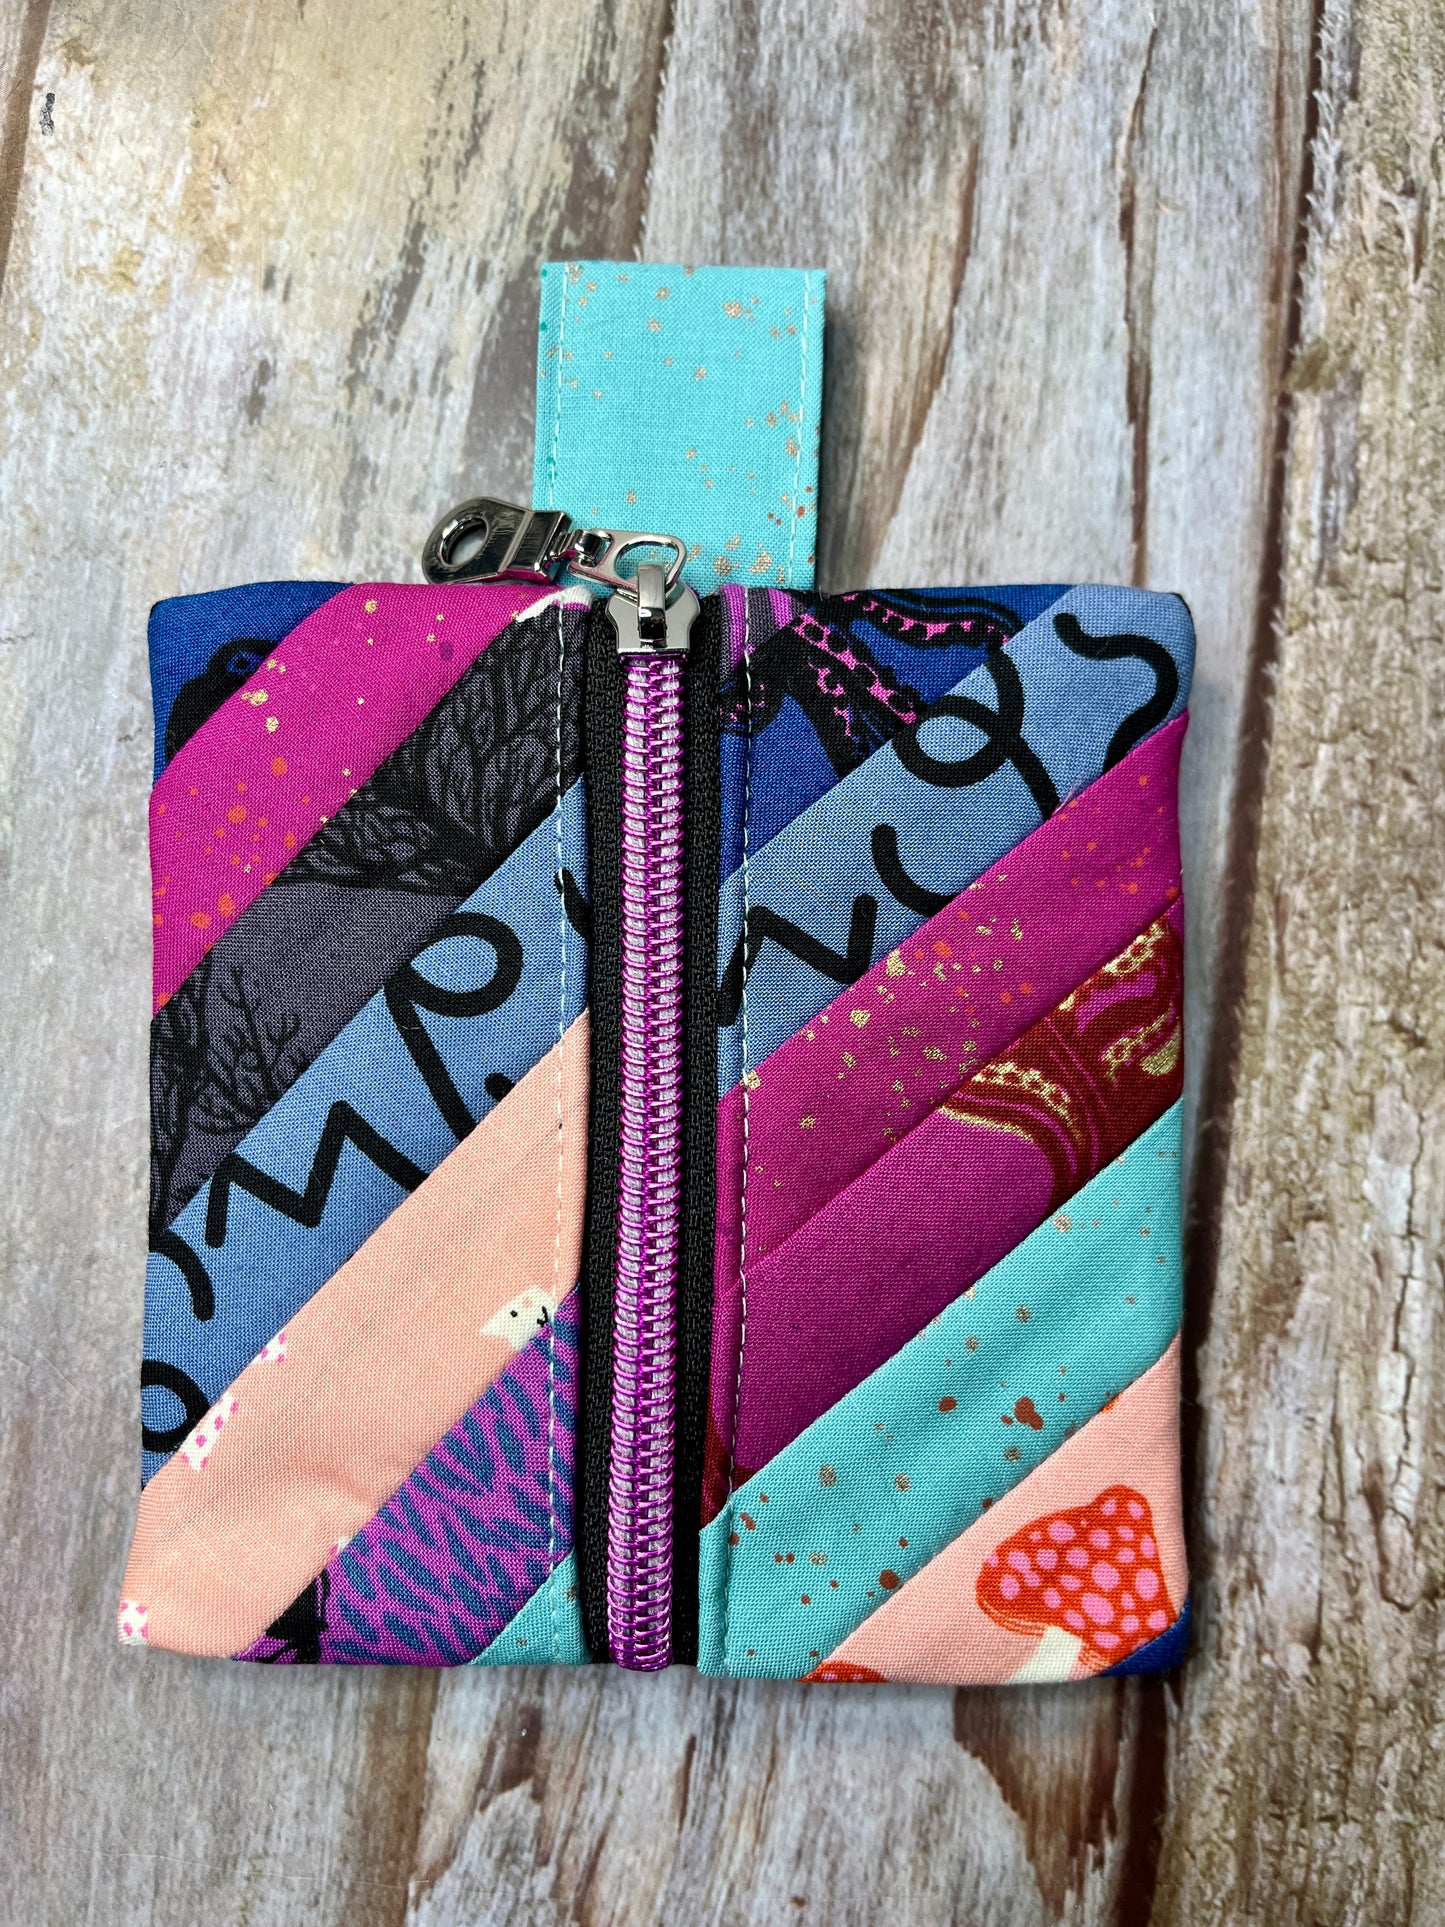 Mini Zip Pouch - Brights - Uphouse Crafts